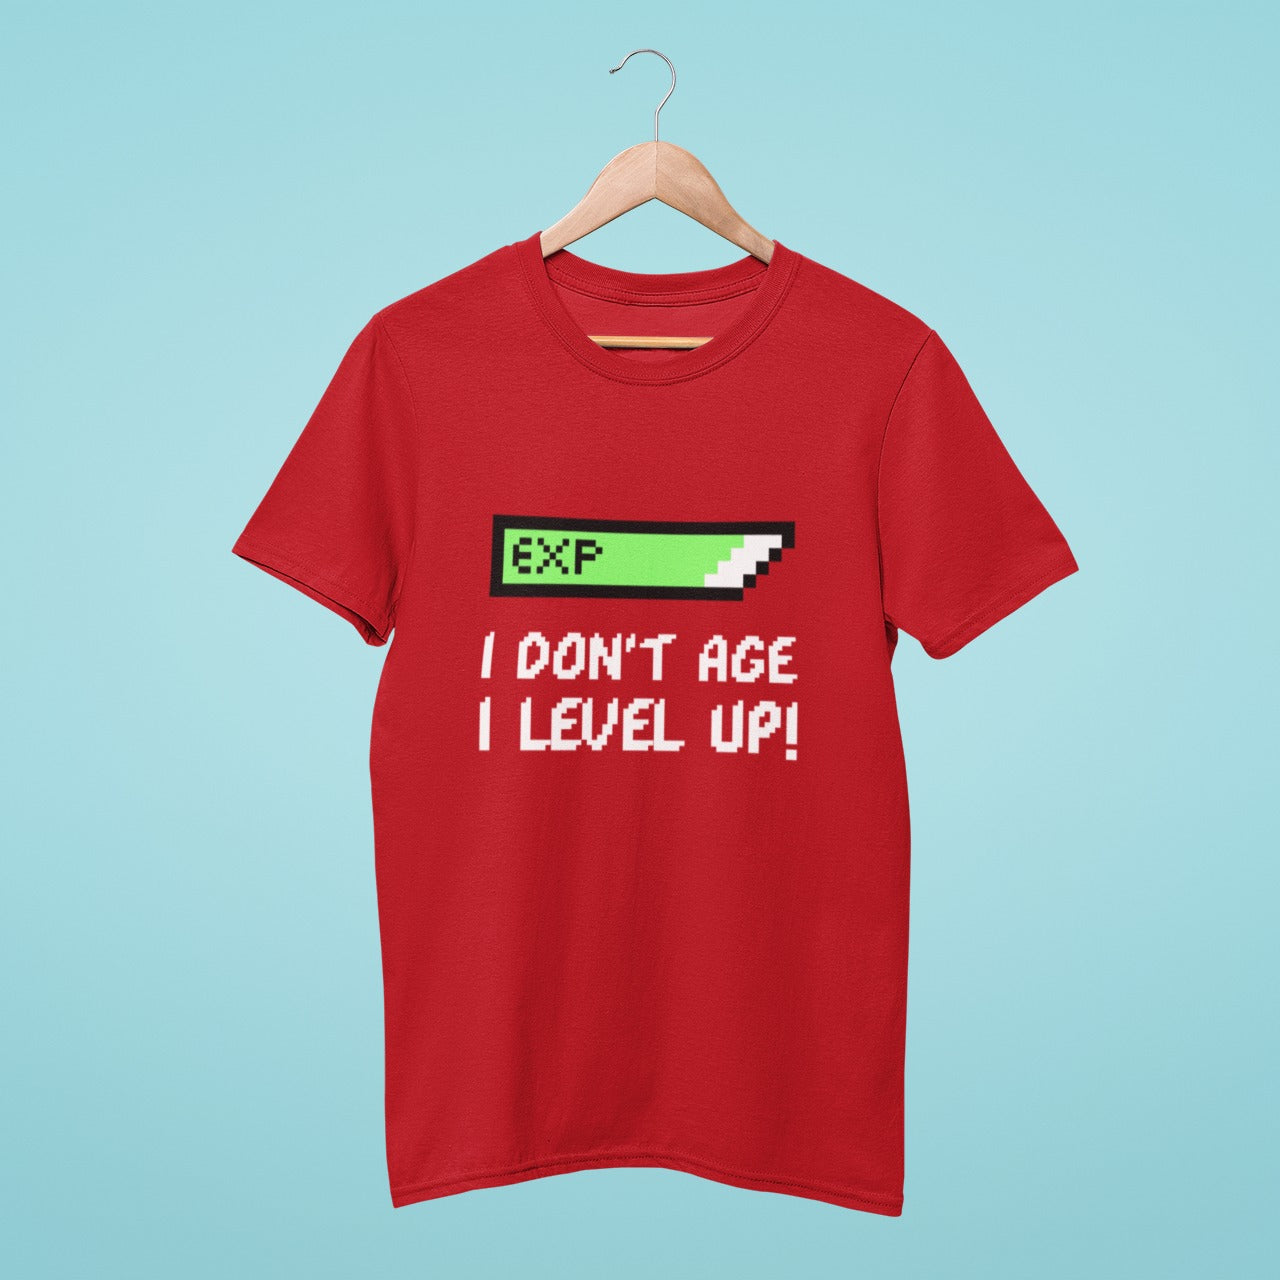 Looking for a fun and playful t-shirt? Check out our red t-shirt with the slogan "I don't age, I level up" and an almost full experience bar graphic. Perfect for gamers, this shirt is made from high-quality materials and is designed to be comfortable and durable. Order yours today and level up your wardrobe!